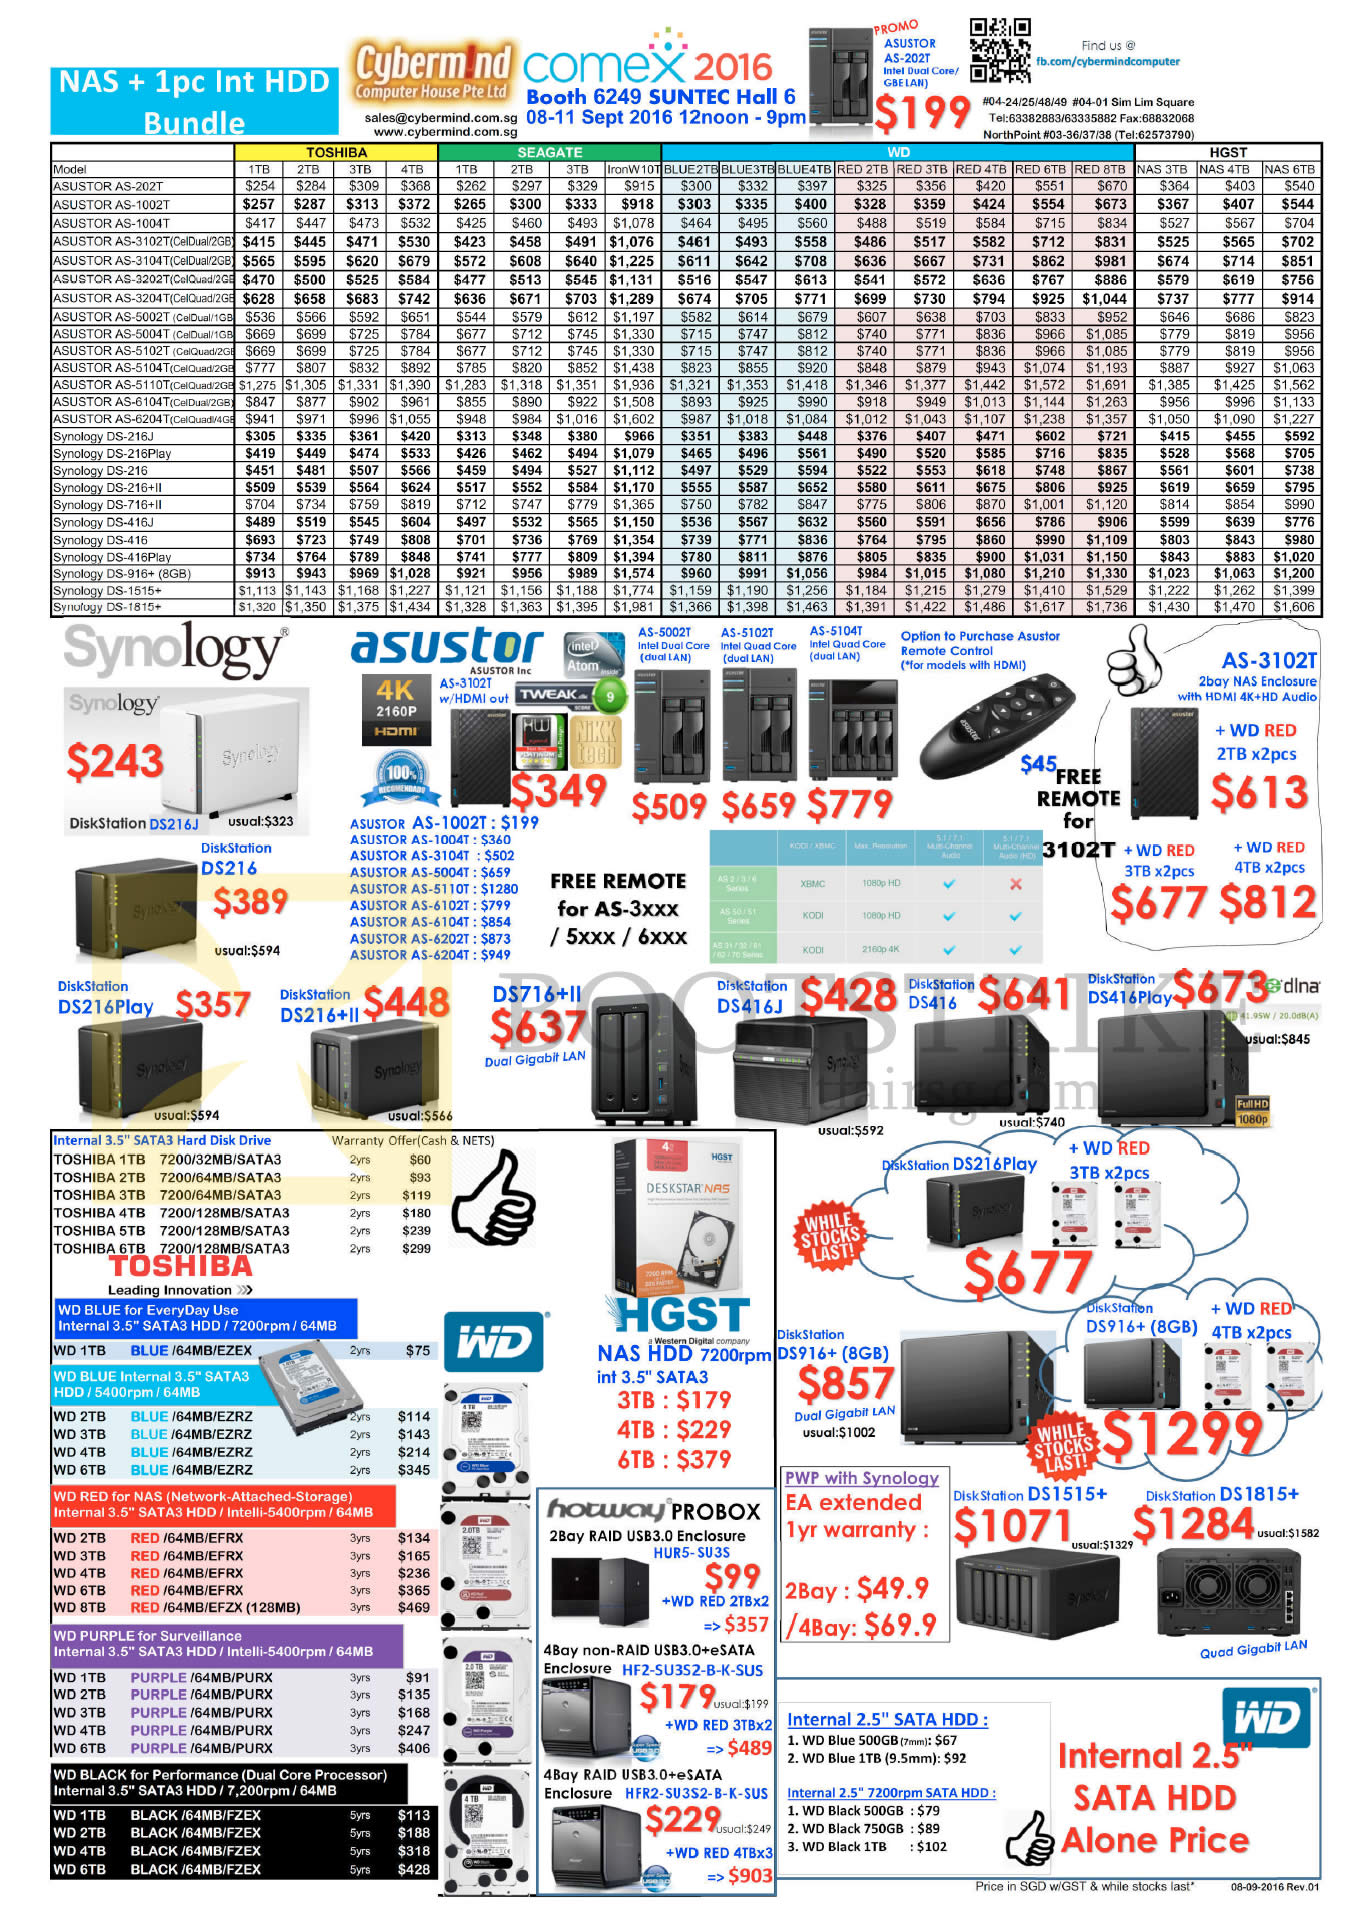 COMEX 2016 price list image brochure of Cybermind NAS, Hard Disk Drives, Synology, Asustor, Toshiba, WD, Western Digital, HGST